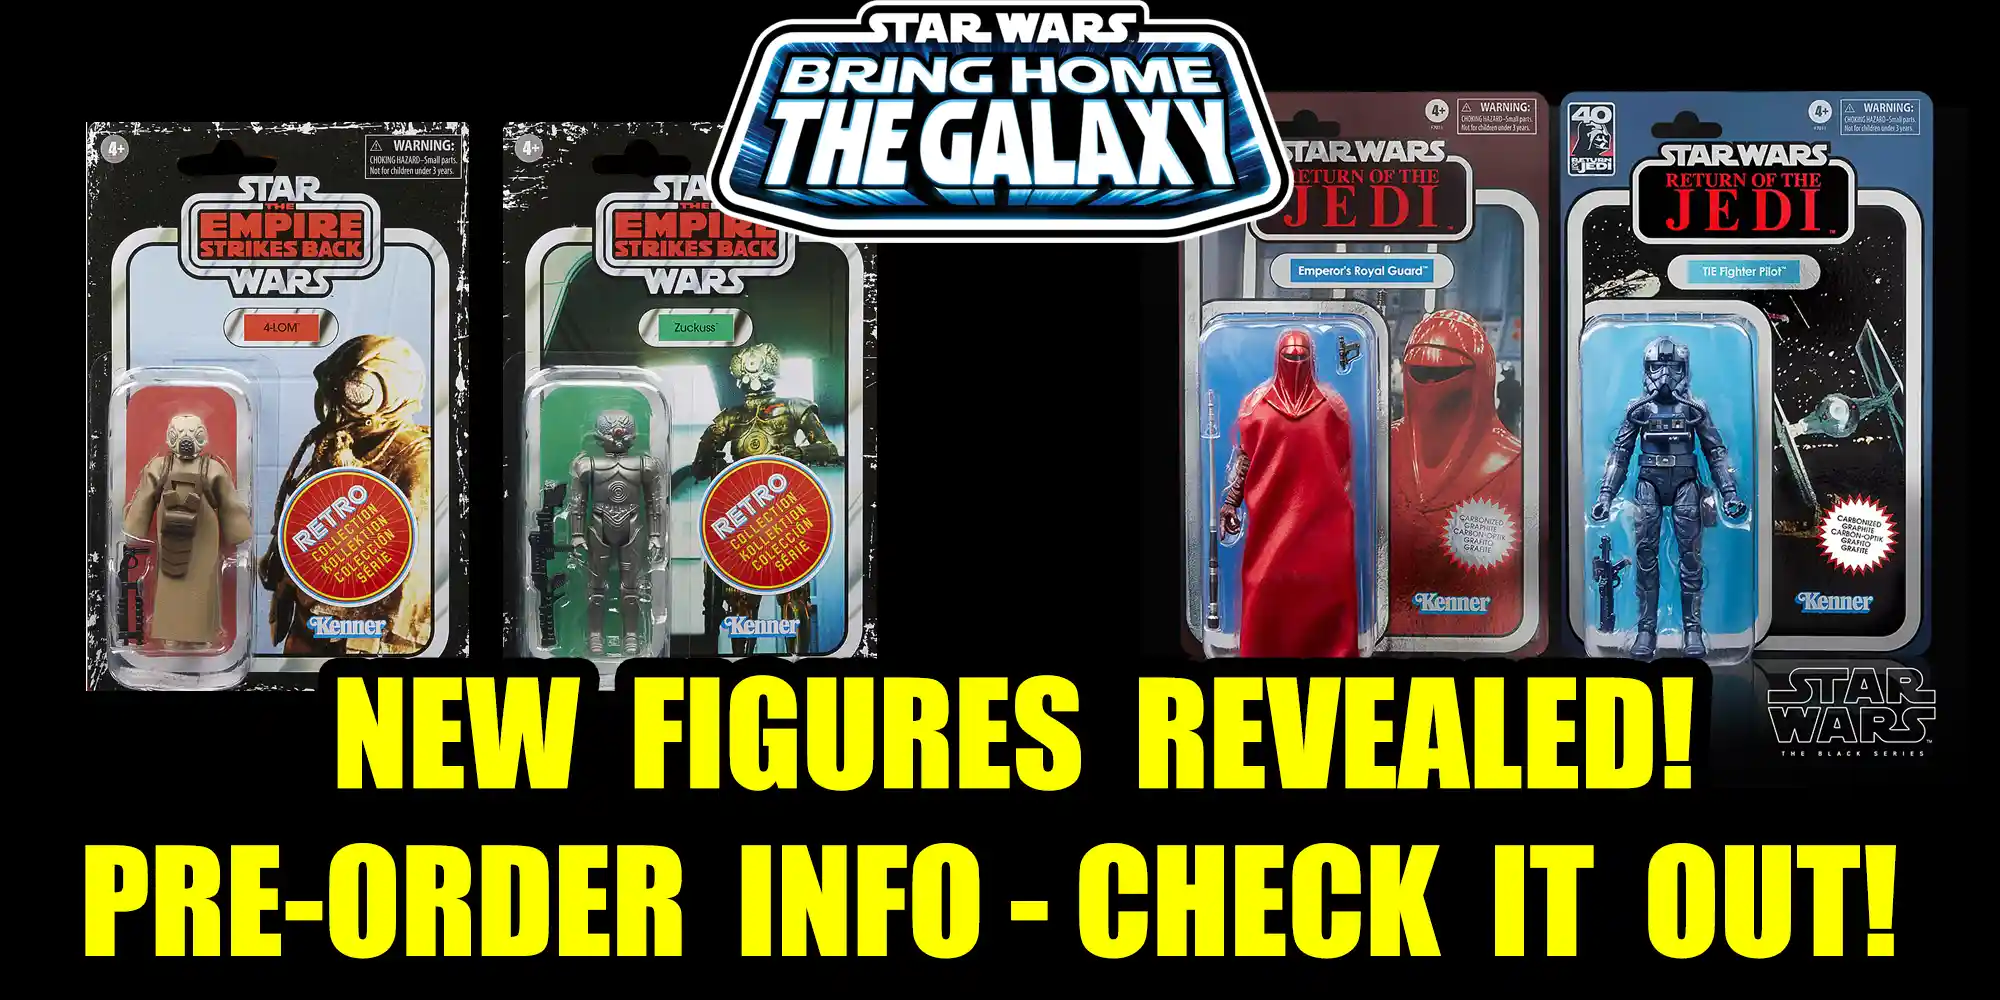 Bring Home The Galaxy Reveals